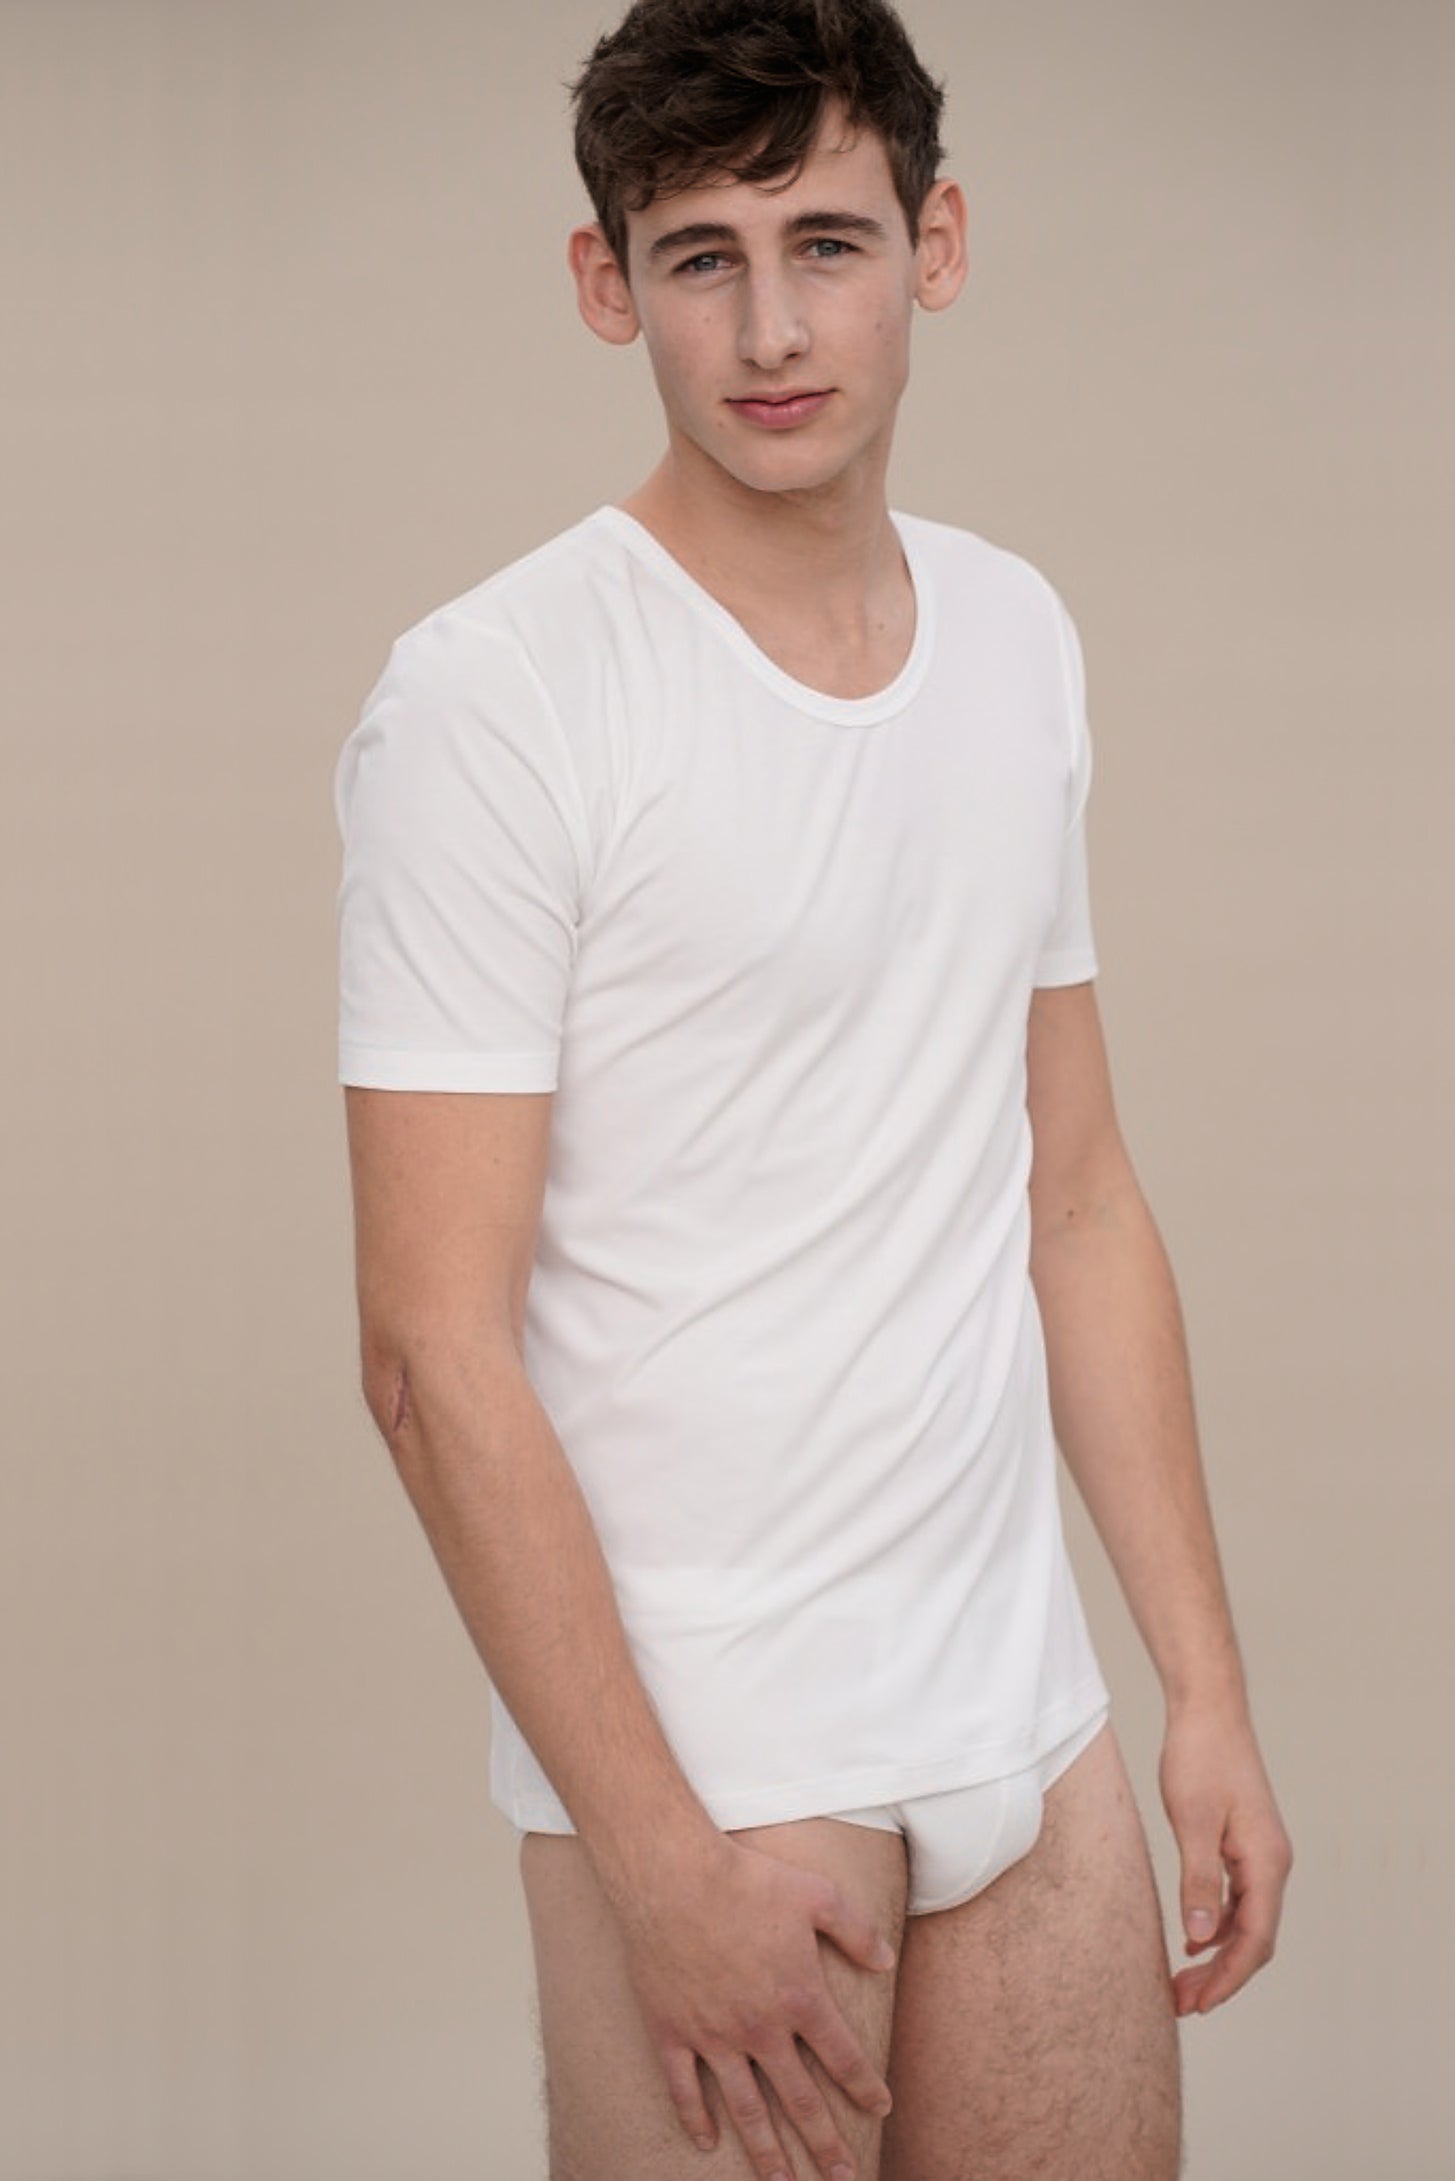 T-shirt / undershirt in white made from natural MicroModal from moi-basics